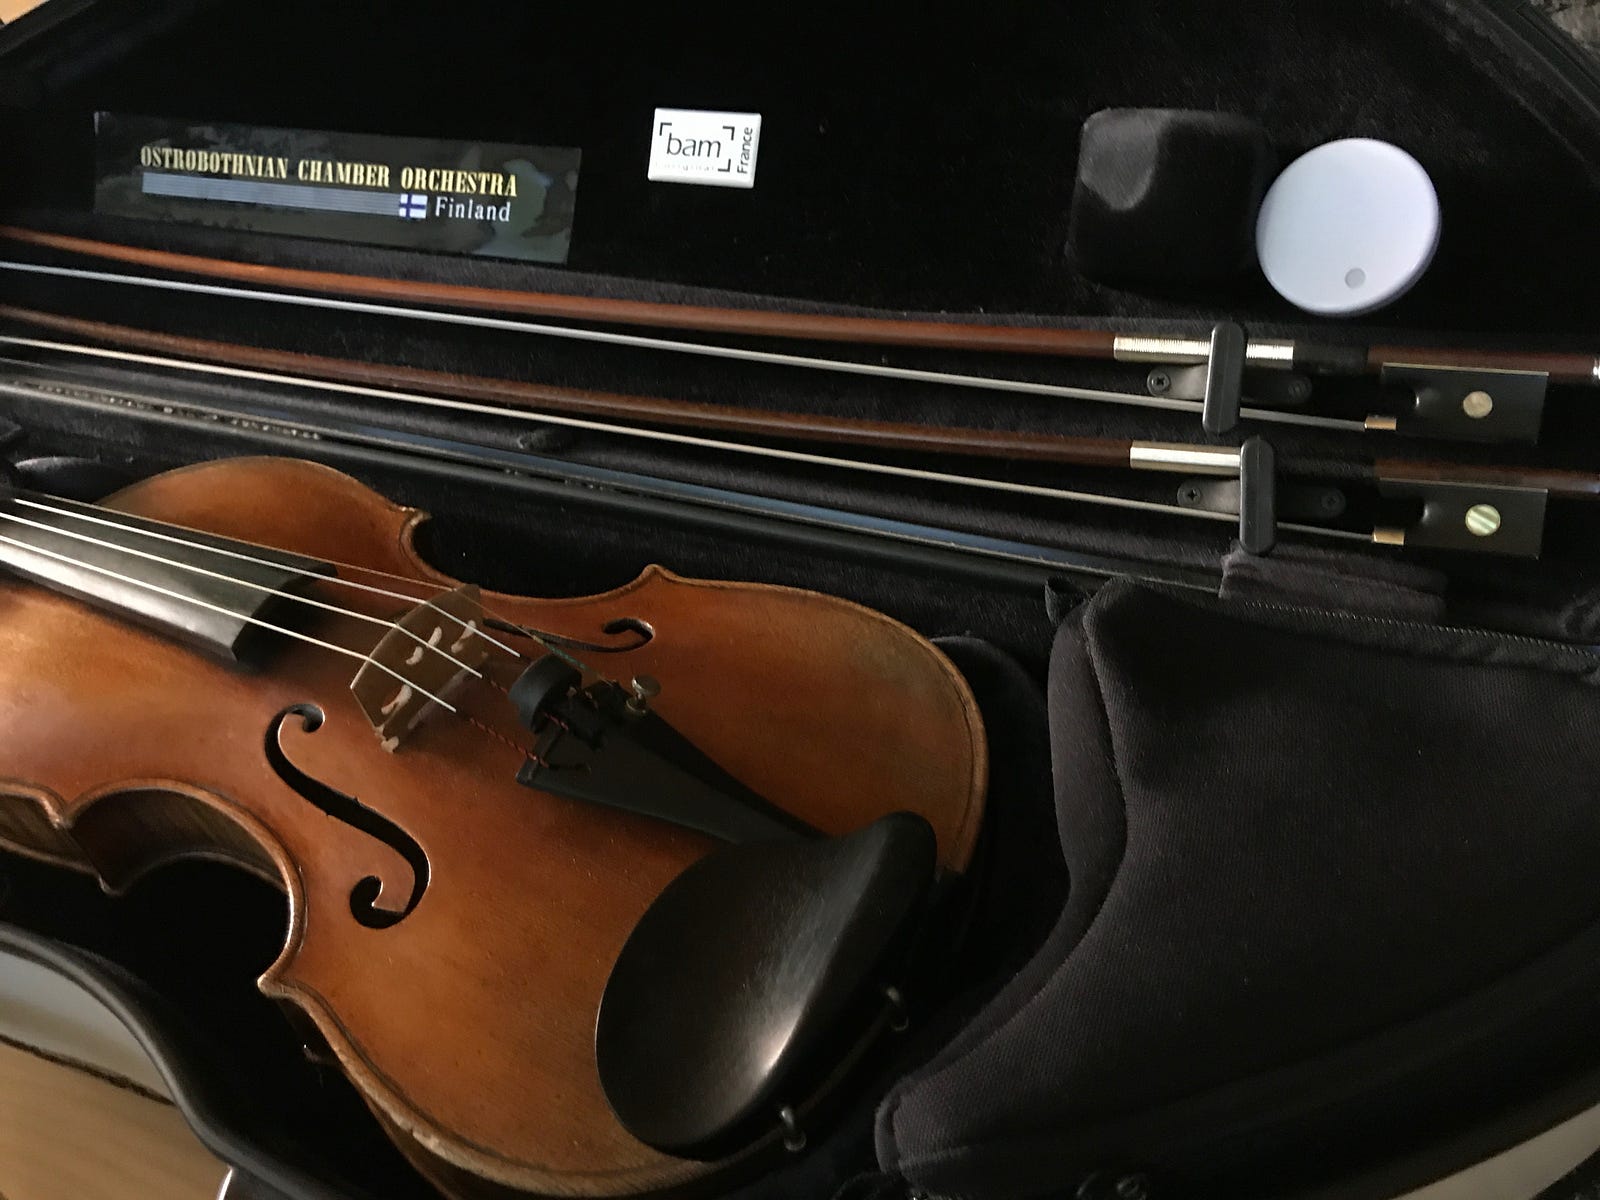 Violin storing made easy with RuuviTag as a humidity sensor in a violin case